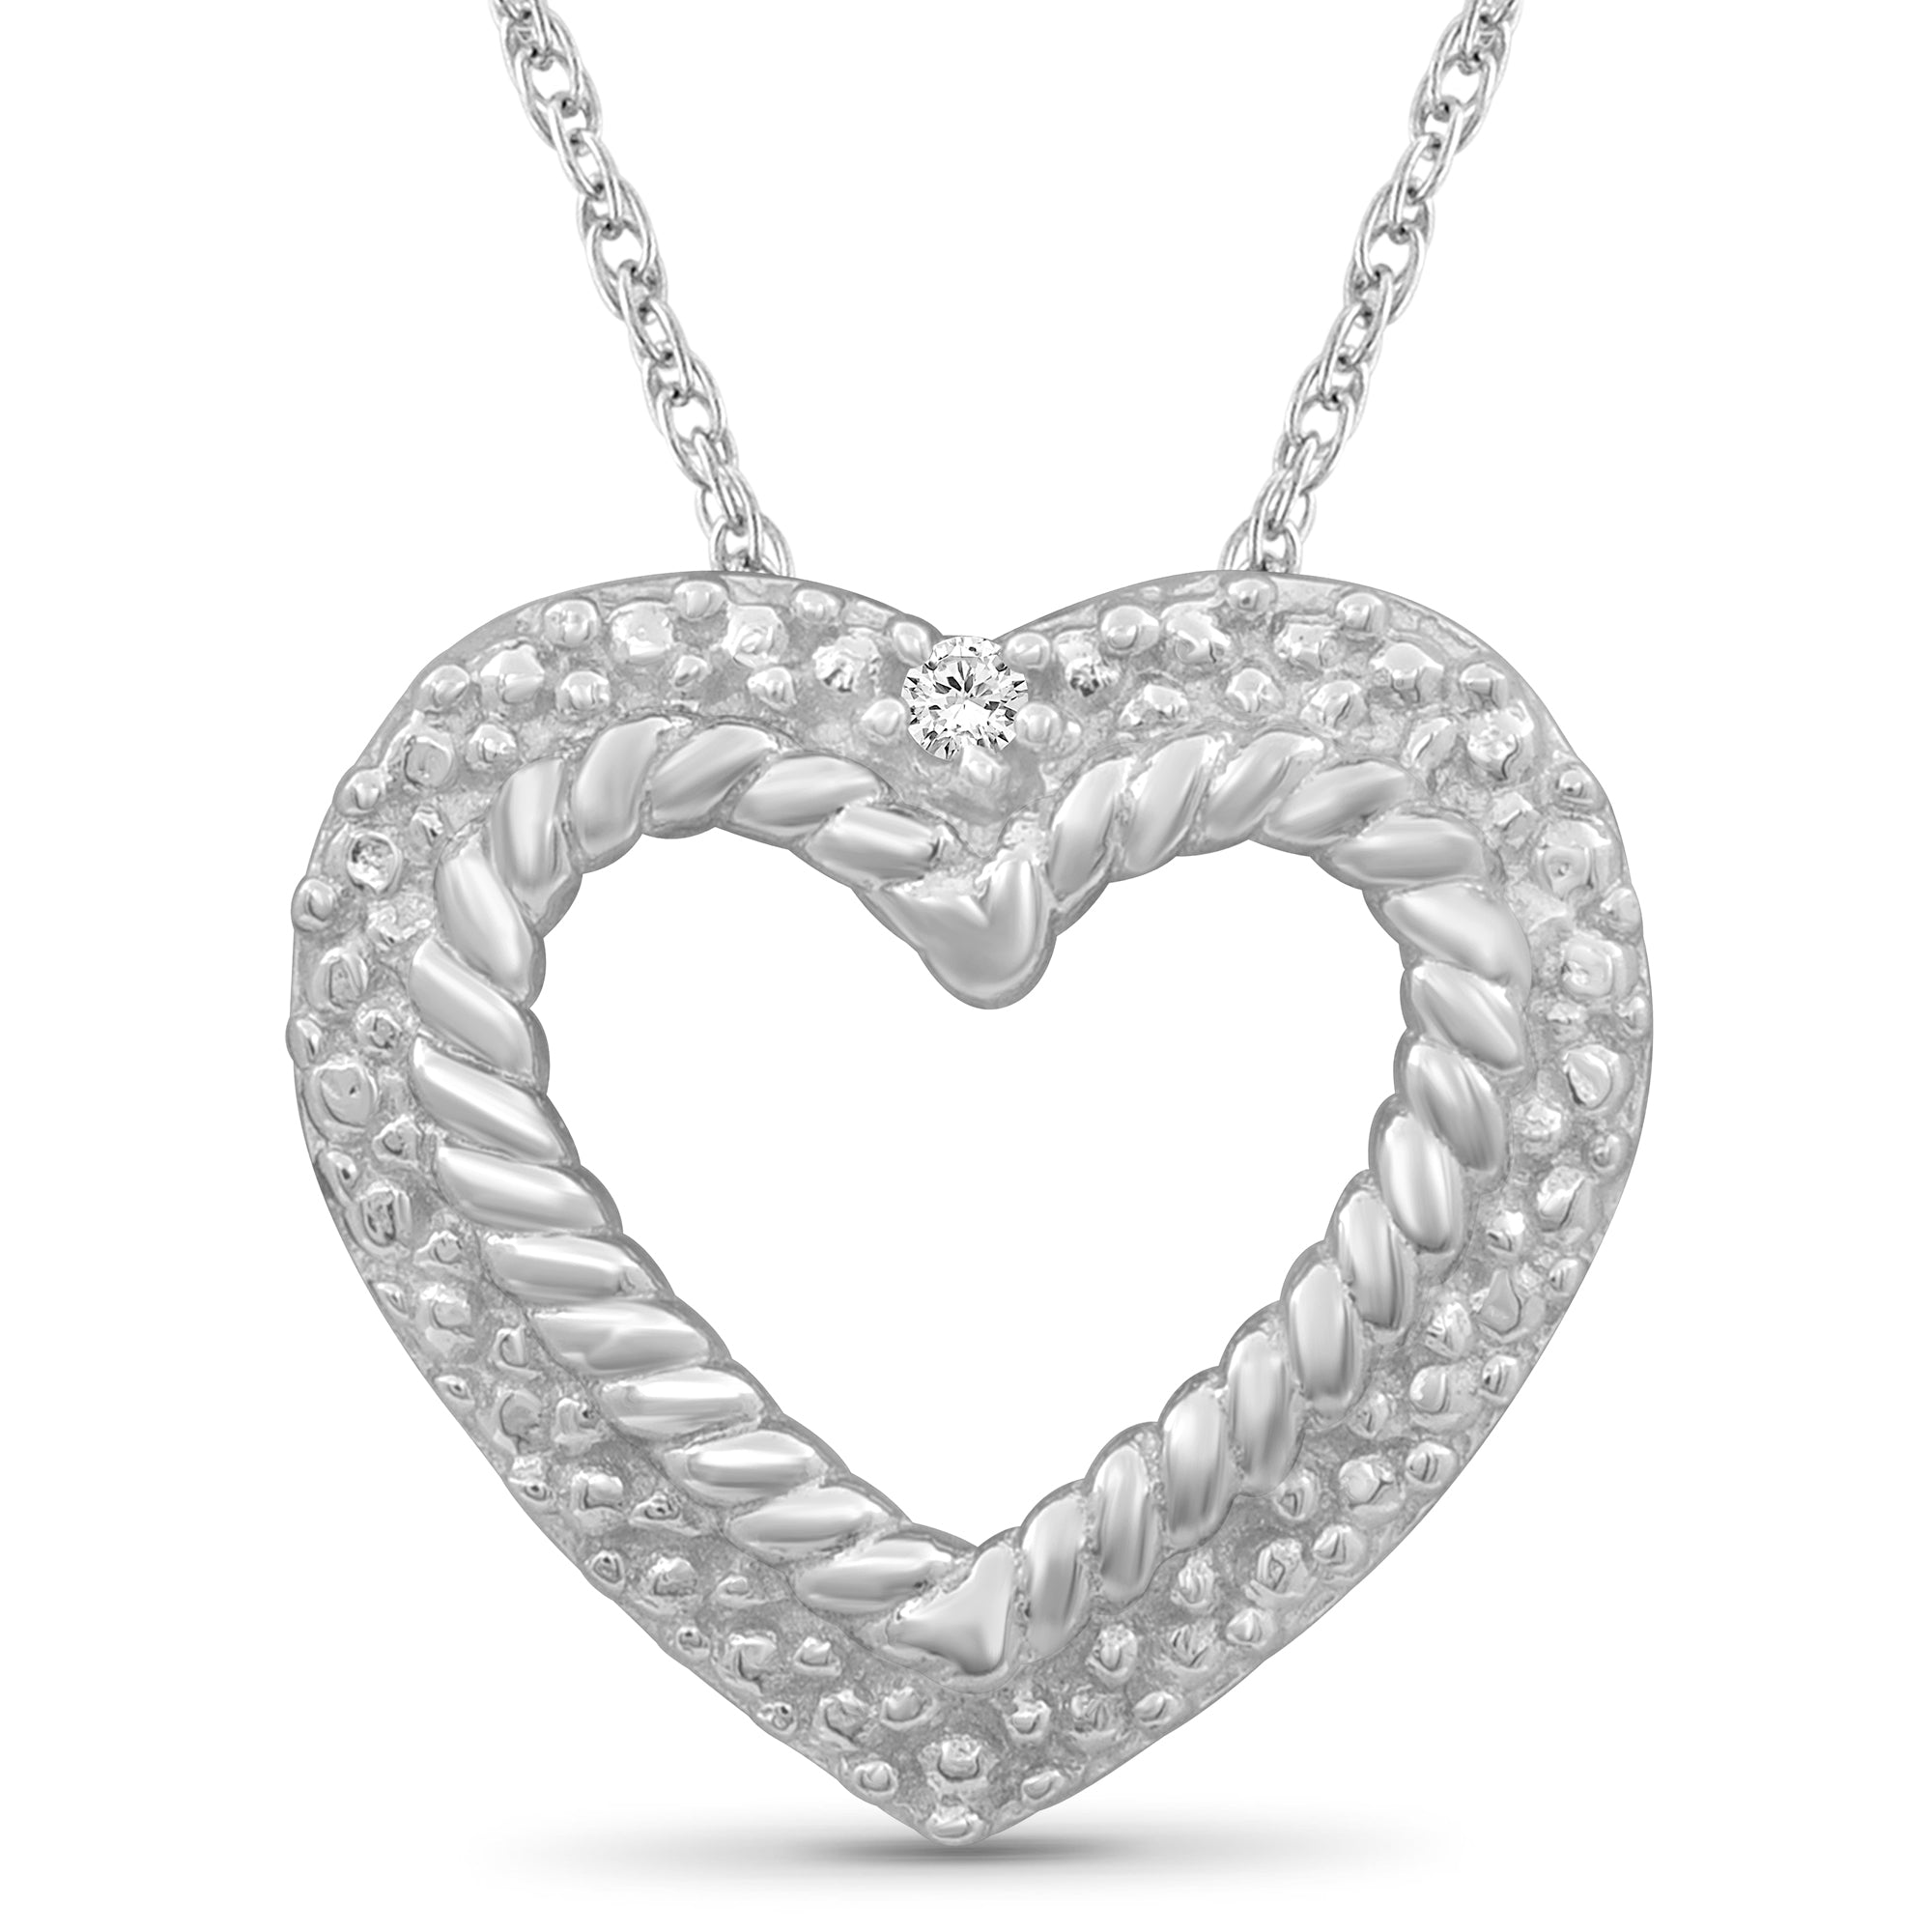 Heart Necklace with White Diamond Accent | Sterling Silver (.925) or 14K Gold-Plated Silver |  Jewelry Pendant Necklaces for Women & 18 inch Rope Chain with Spring Clasp